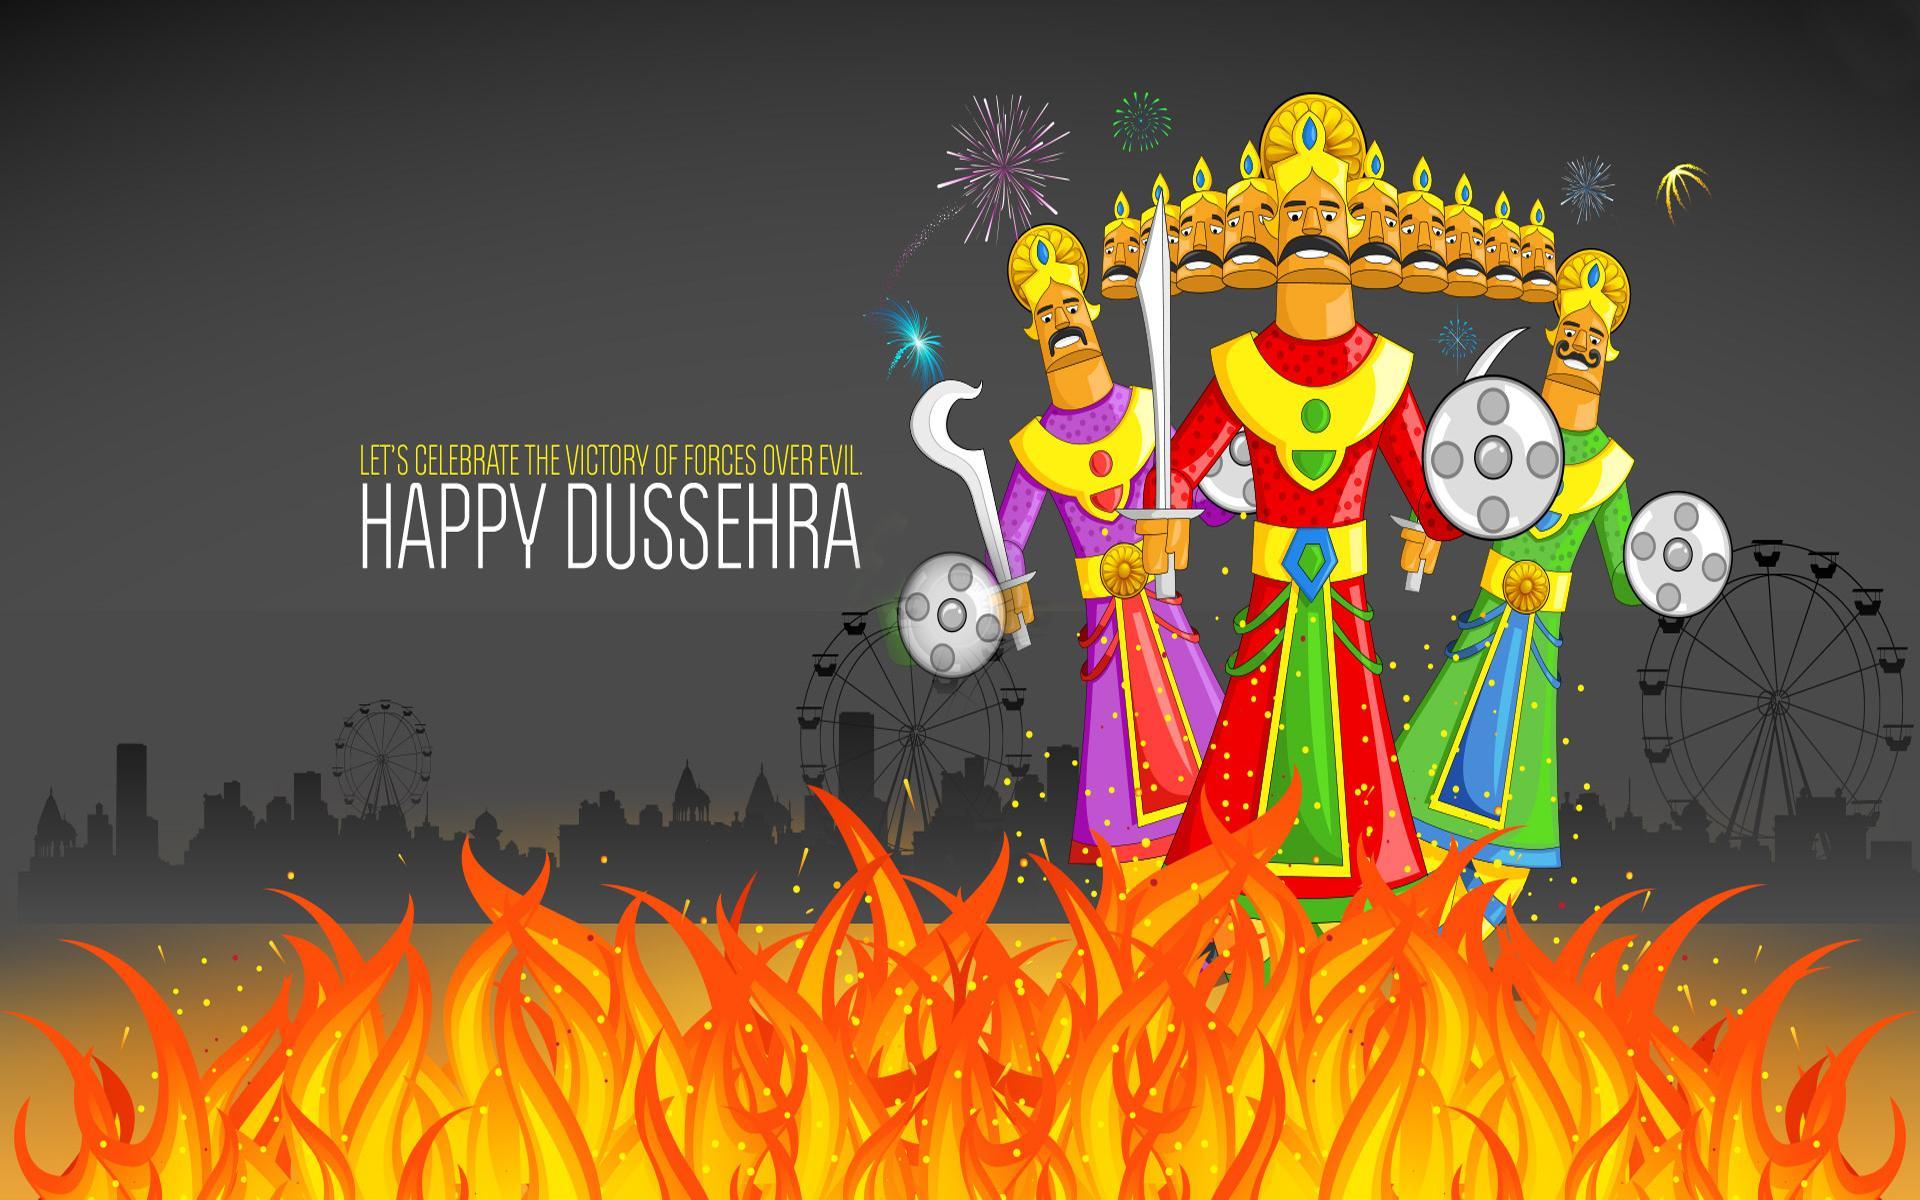 Happy Dussehra Wallpaper 2015 for Android